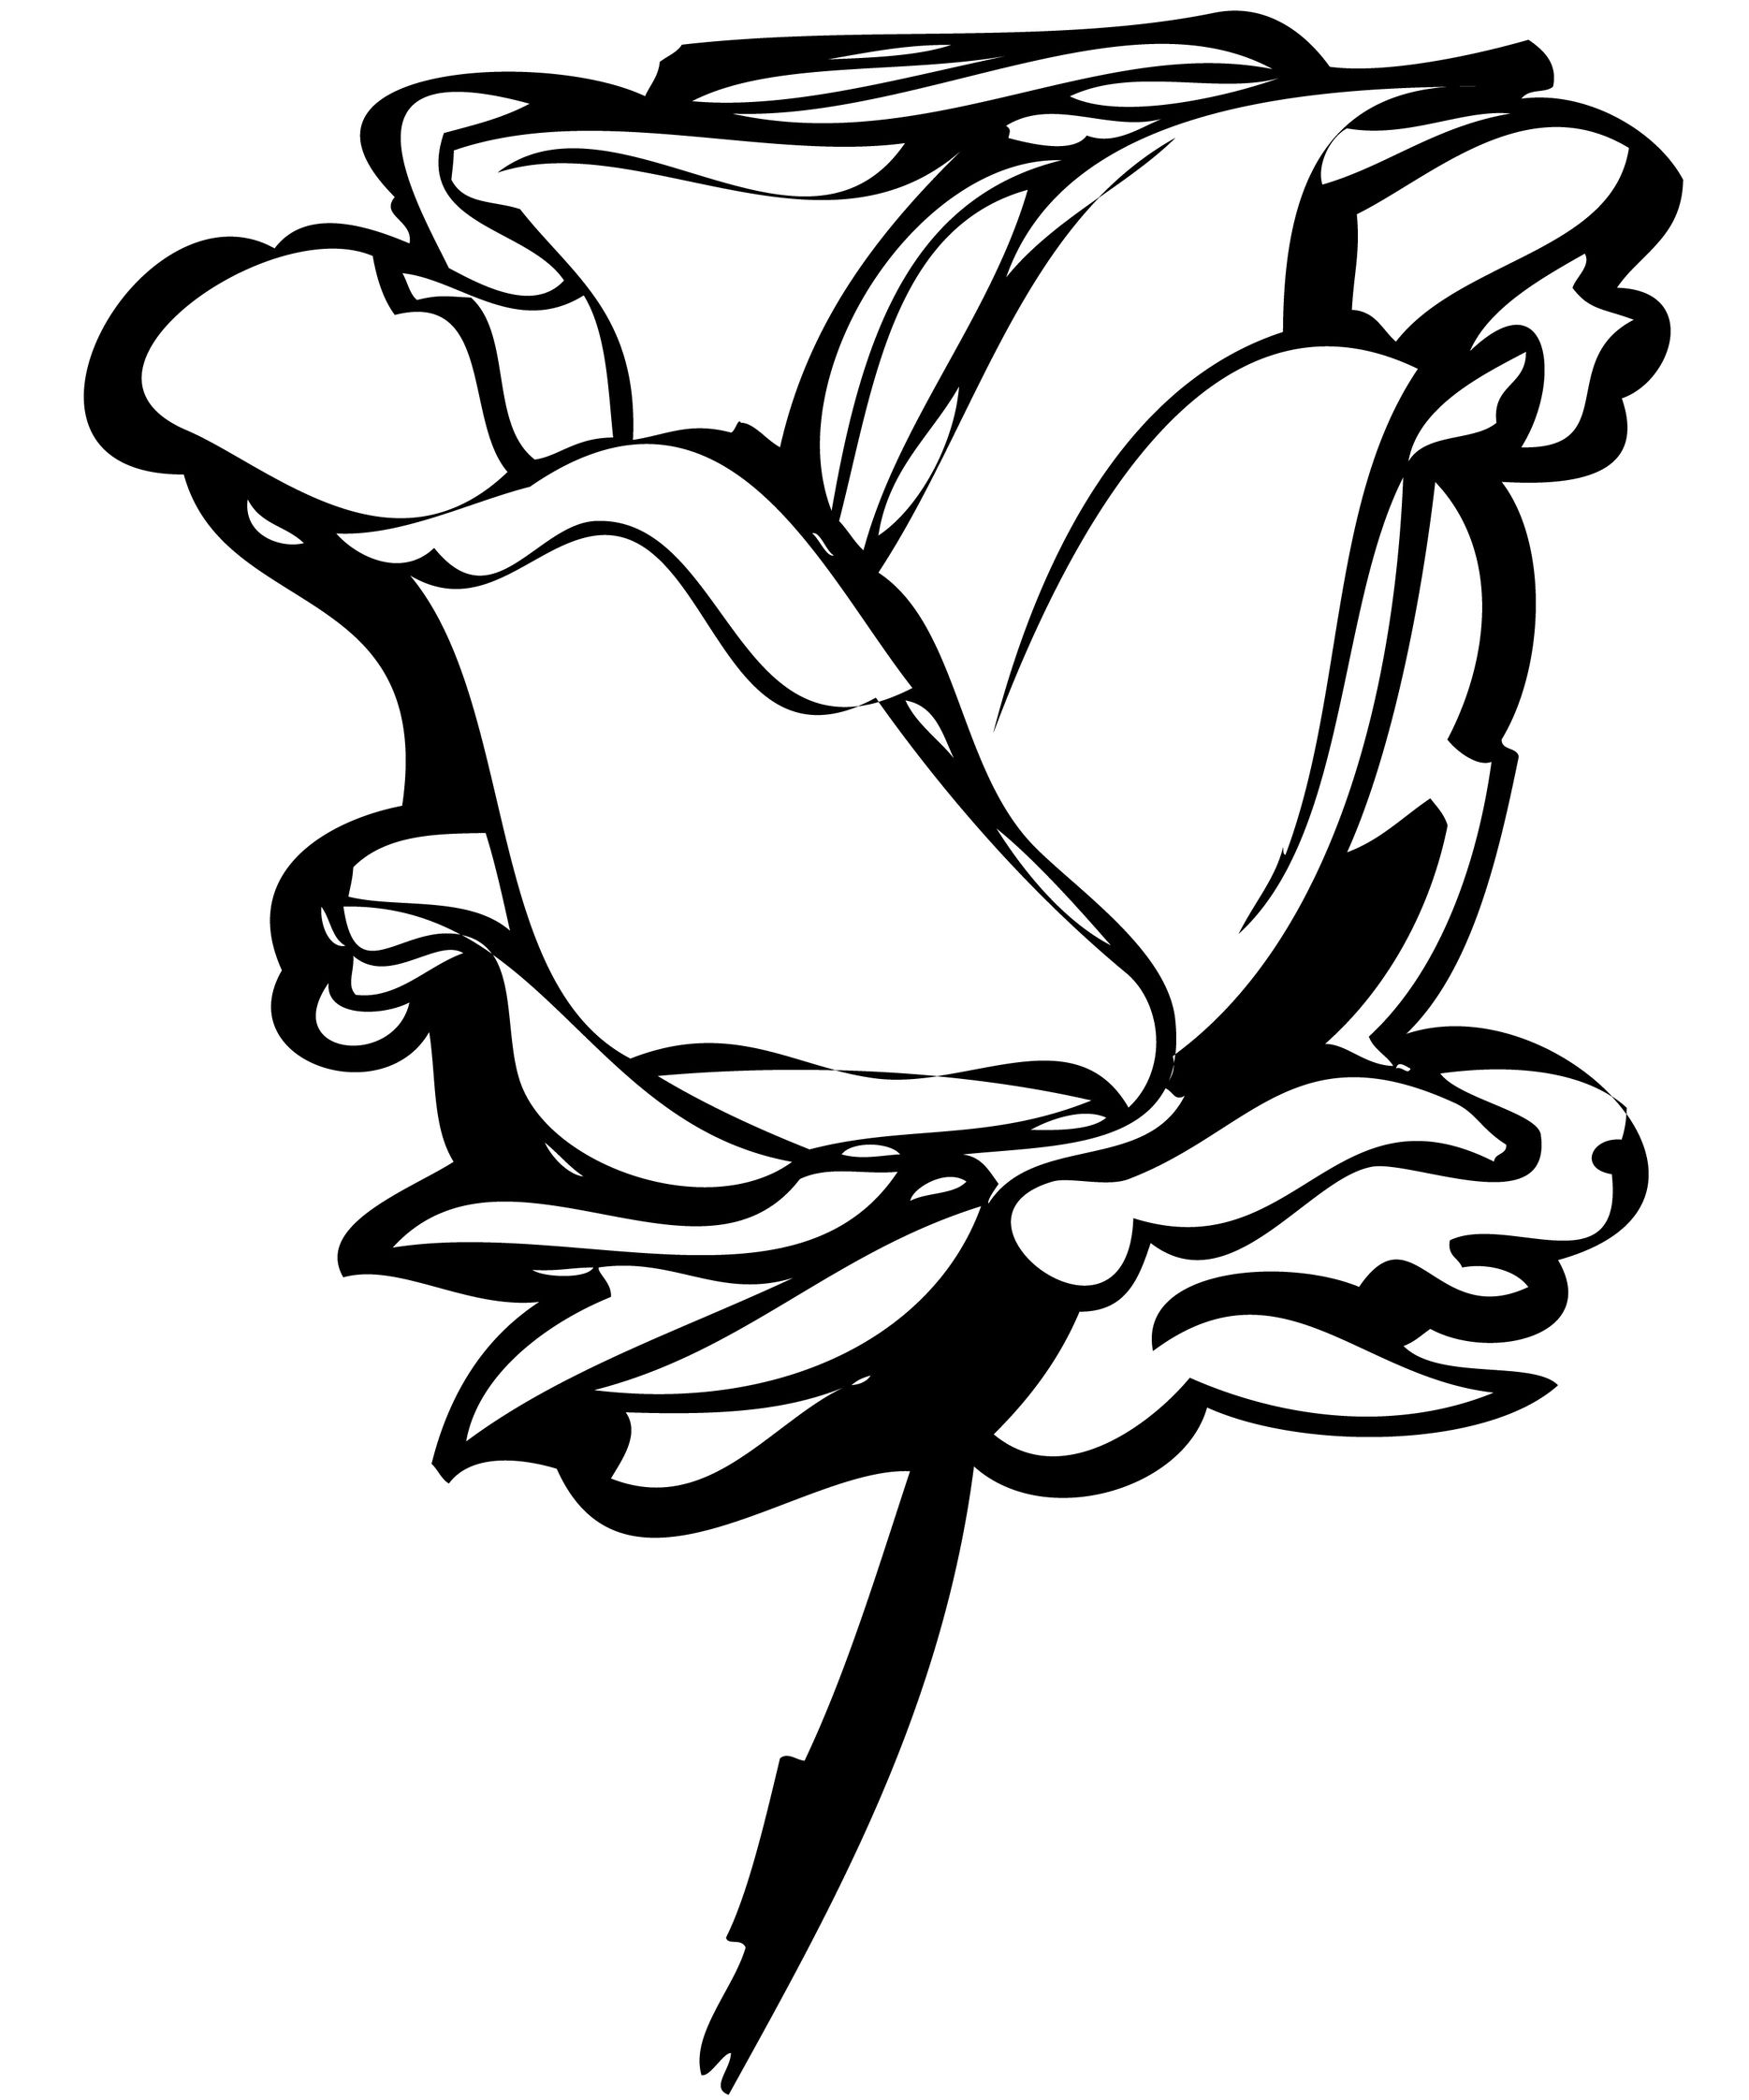 free black and white clip art roses - photo #47